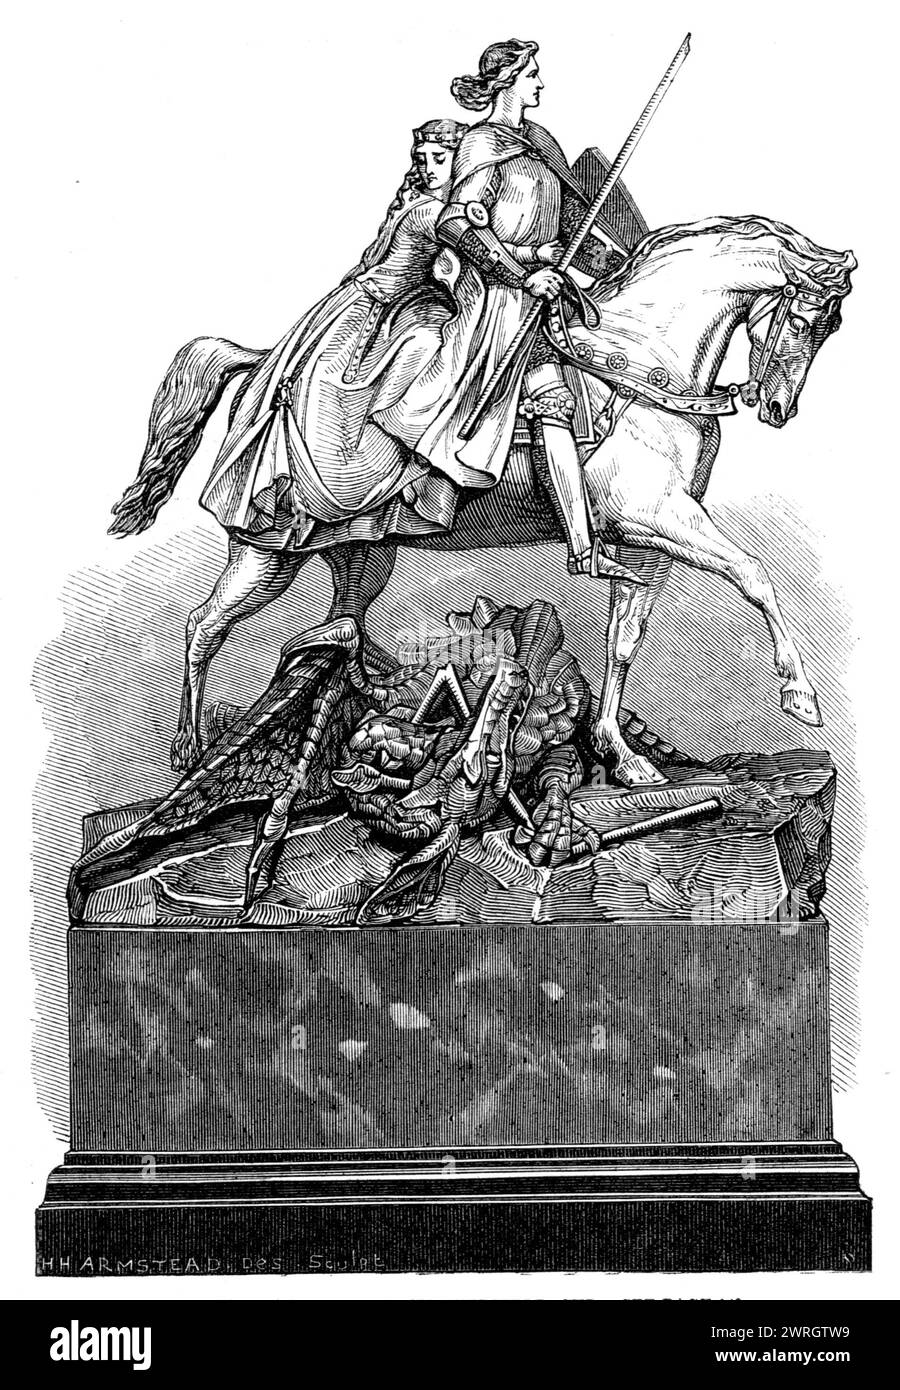 Goodwood Races: The Chesterfield Cup, 1864. 'The Chesterfield Cup is a group in oxydised silver, representing a knight rescuing a lady from a dragon. The subject is taken from Spenser's &quot;Faerie Queen,&quot; and the horse and the figure of the woman clinging to her preserver have been admirably managed by Mr. H. Armstead, to whom the work of modelling was intrusted by Mr. Harry Emanuel, of Bond-street. It was won very easily by Mr. Whittaker's King of Utopia, against whom 16 to 1 was obtainable in a field of twenty-five'. From &quot;Illustrated London News&quot;, 1864. Stock Photo